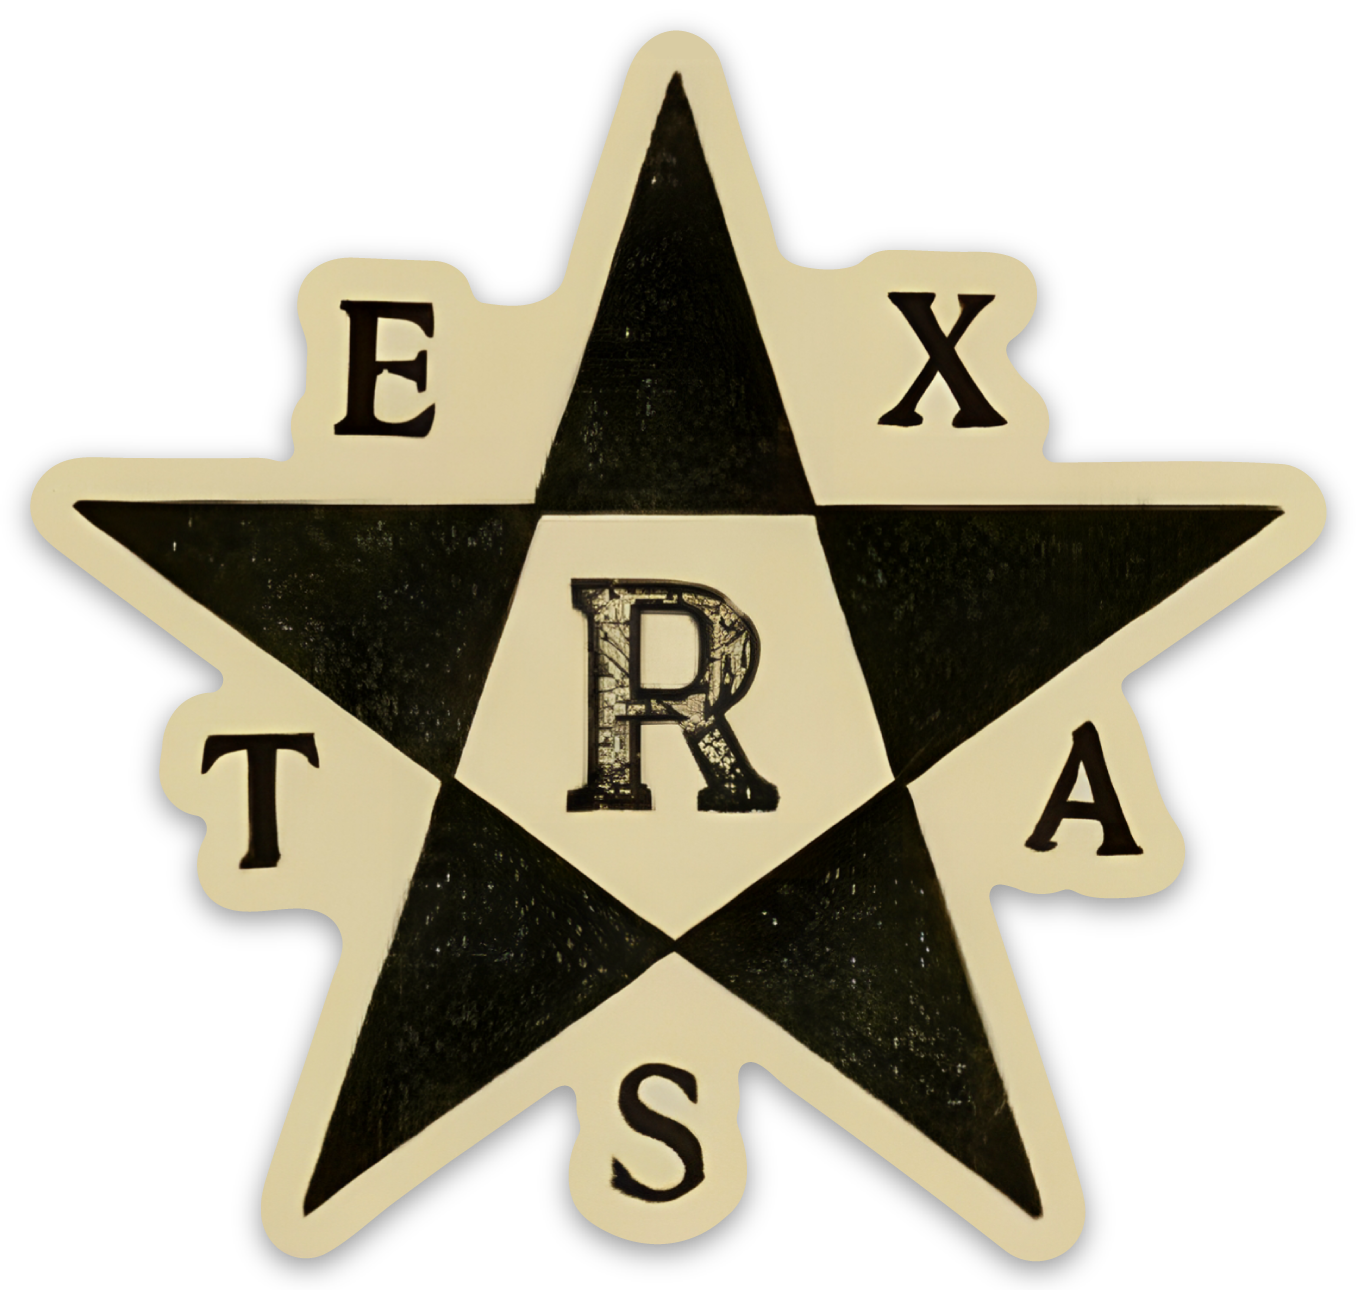 Terry's Texas Rangers -  Hat Insignia Stickers/Magnets